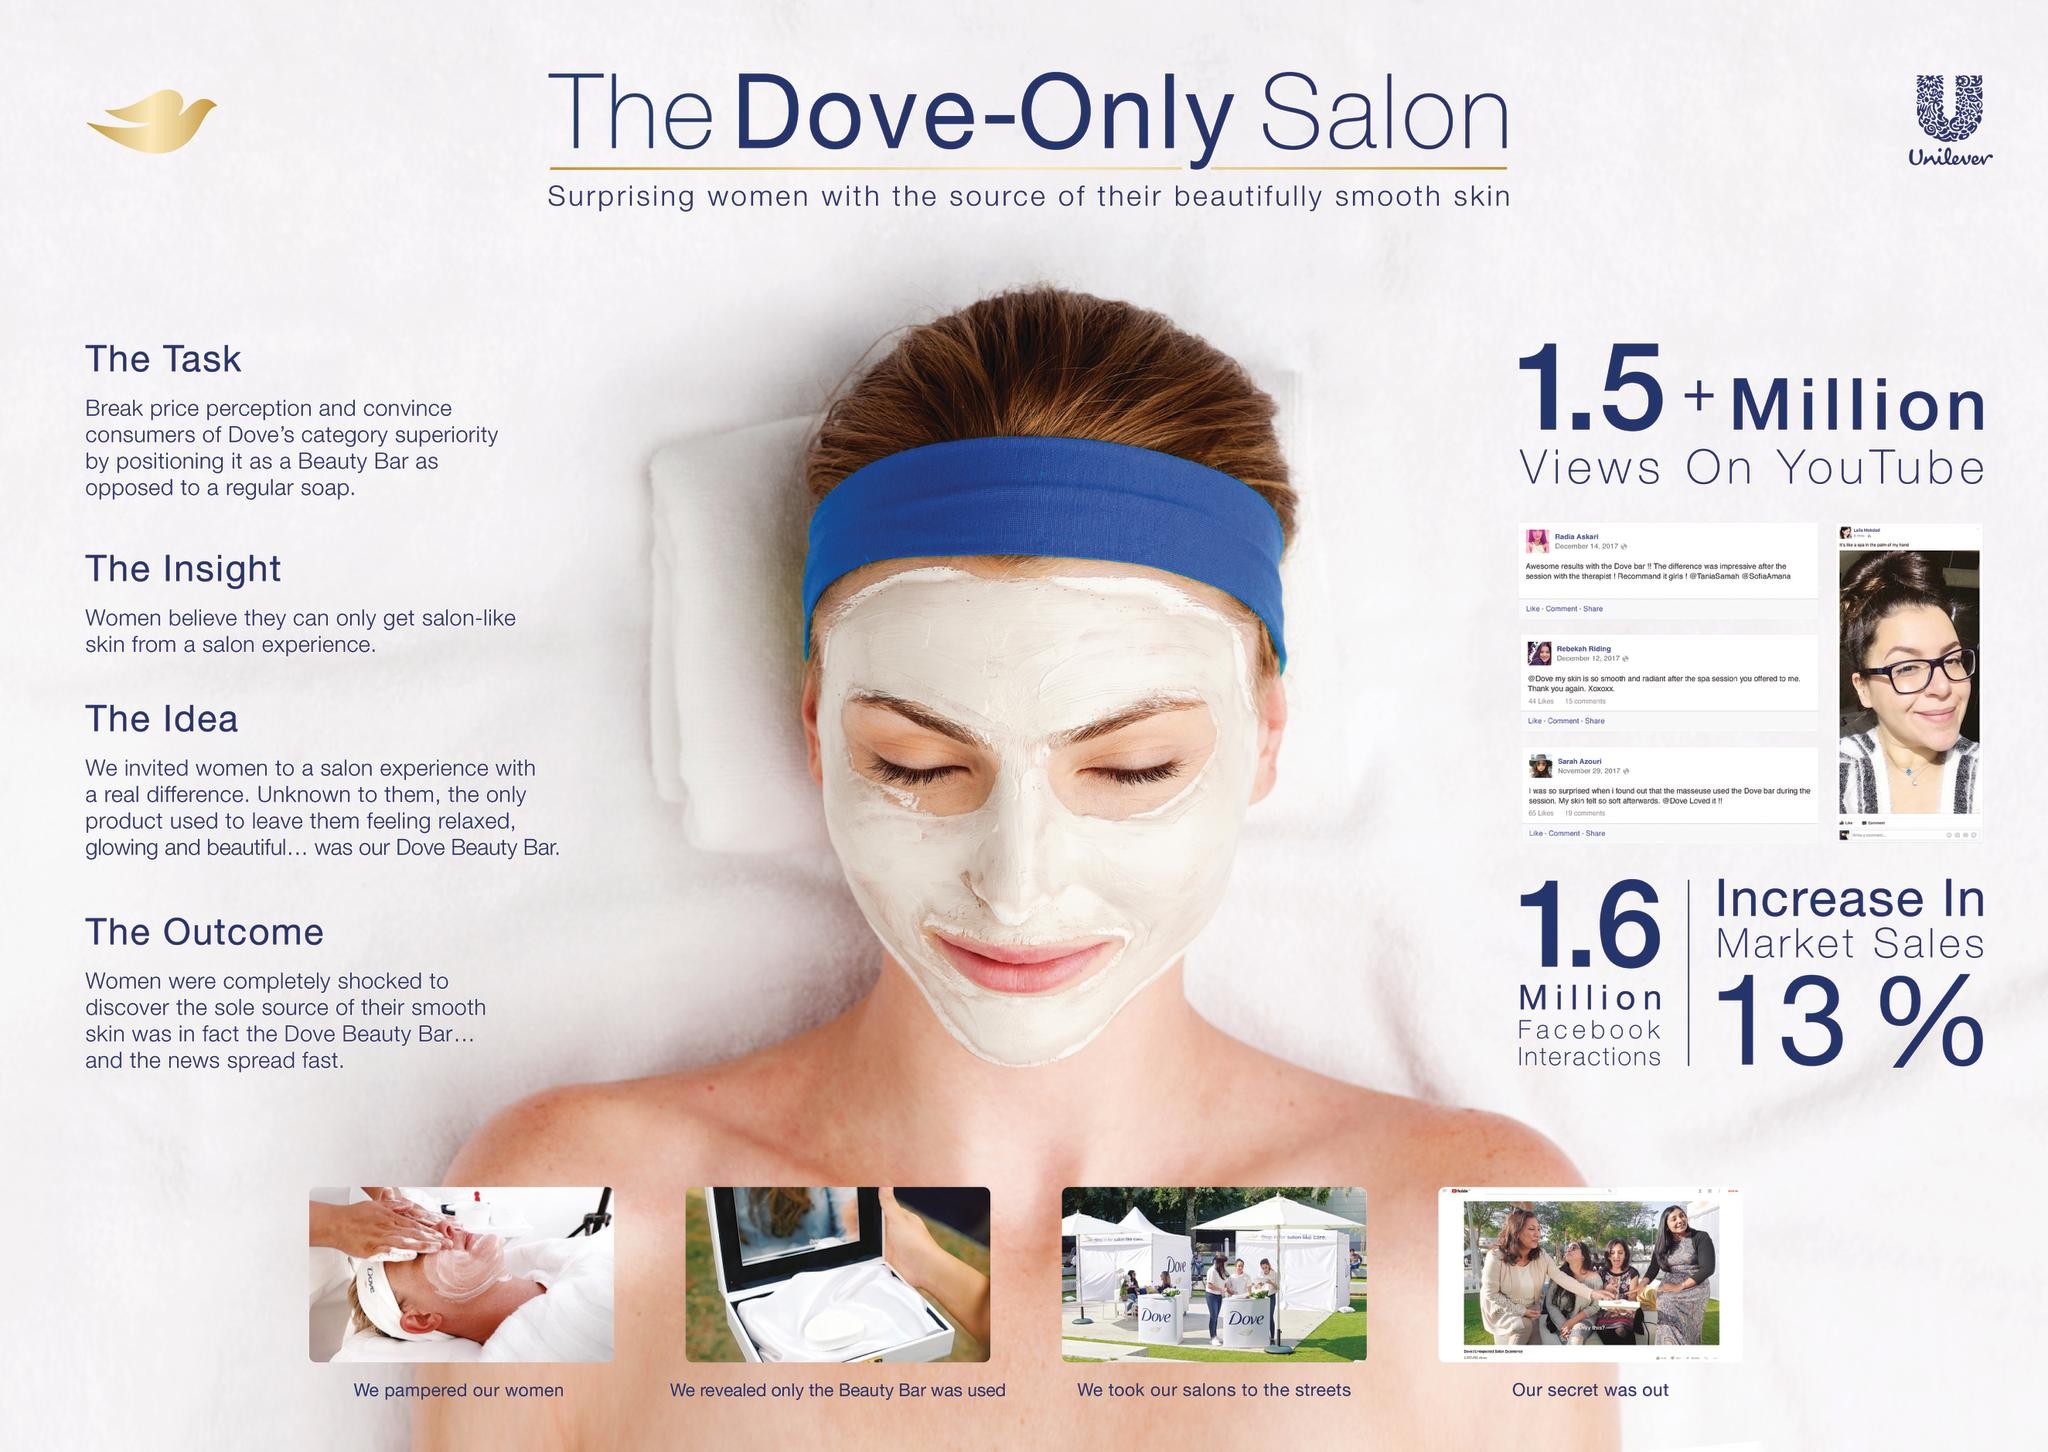 The Dove-Only Salon